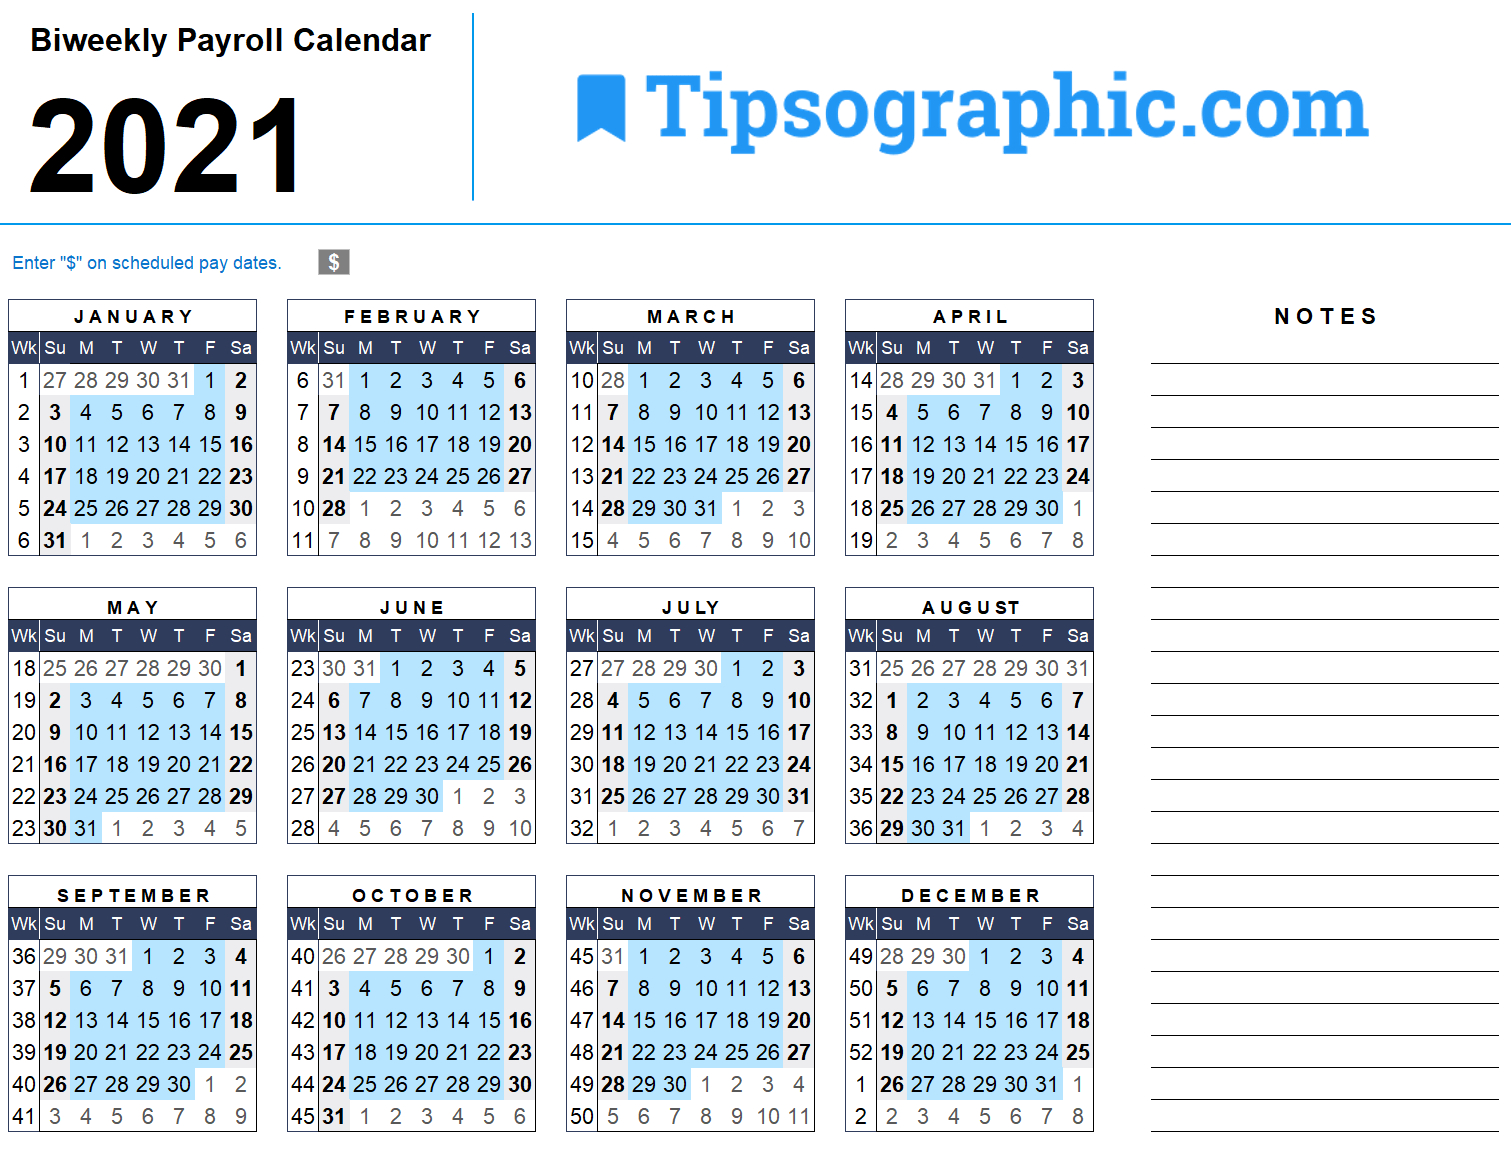 Download The 2021 Biweekly Payroll Calendar | Tipsographic-2021 Employee Vacation Calendar Excel Template